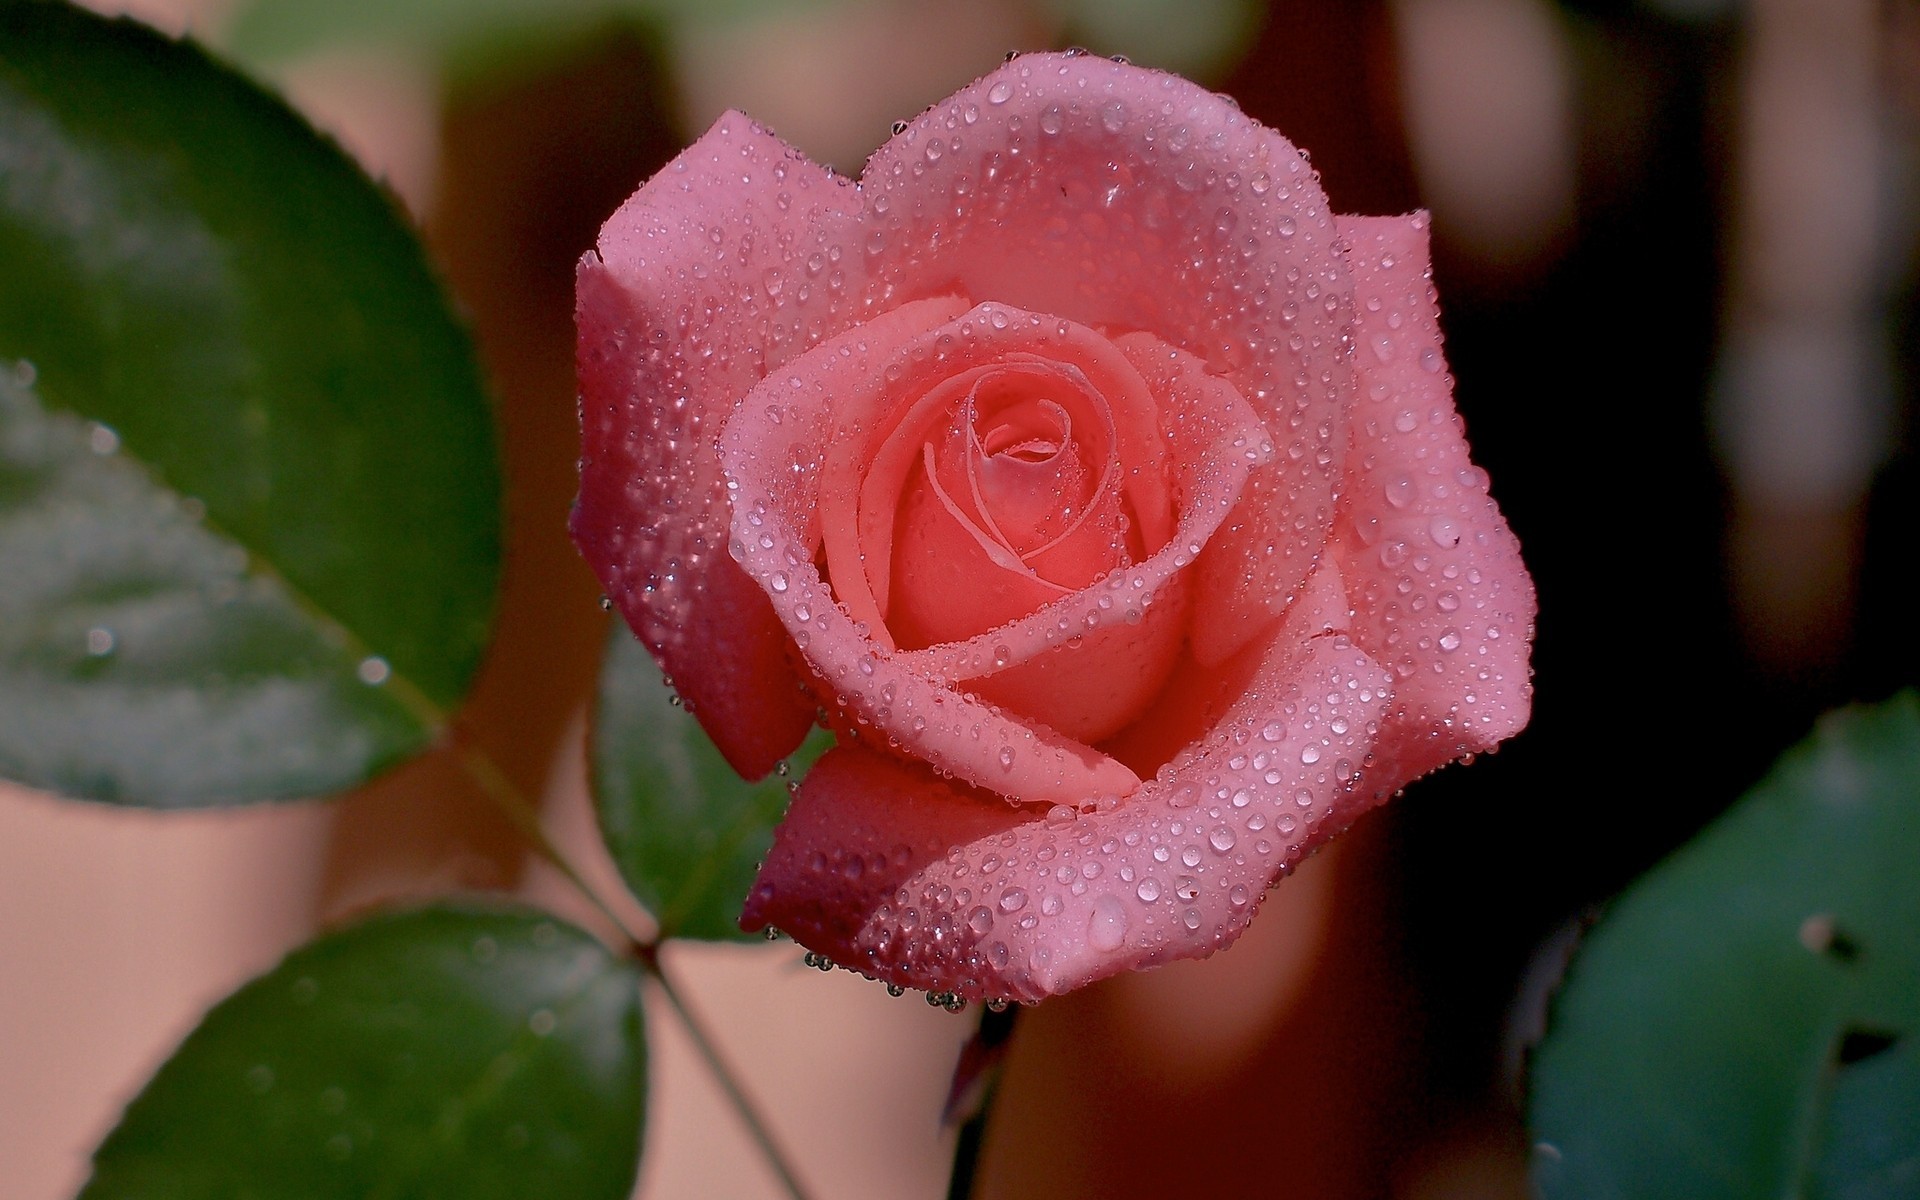 flowers, roses, plants, drops, red 2160p